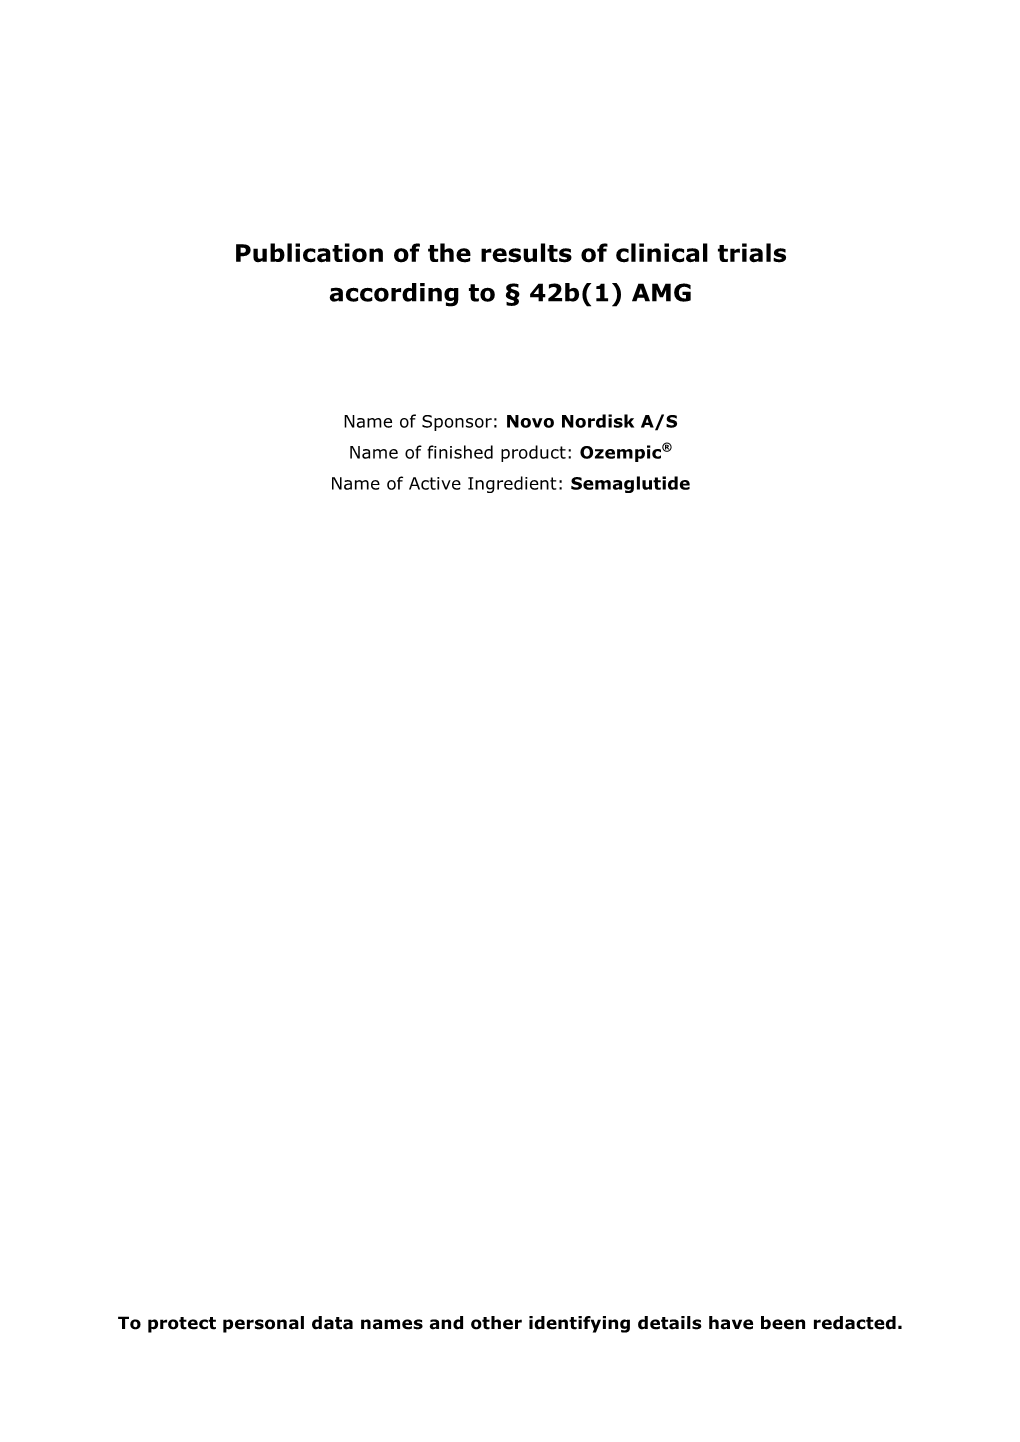 Publication of the Results of Clinical Trials According to § 42B(1) AMG